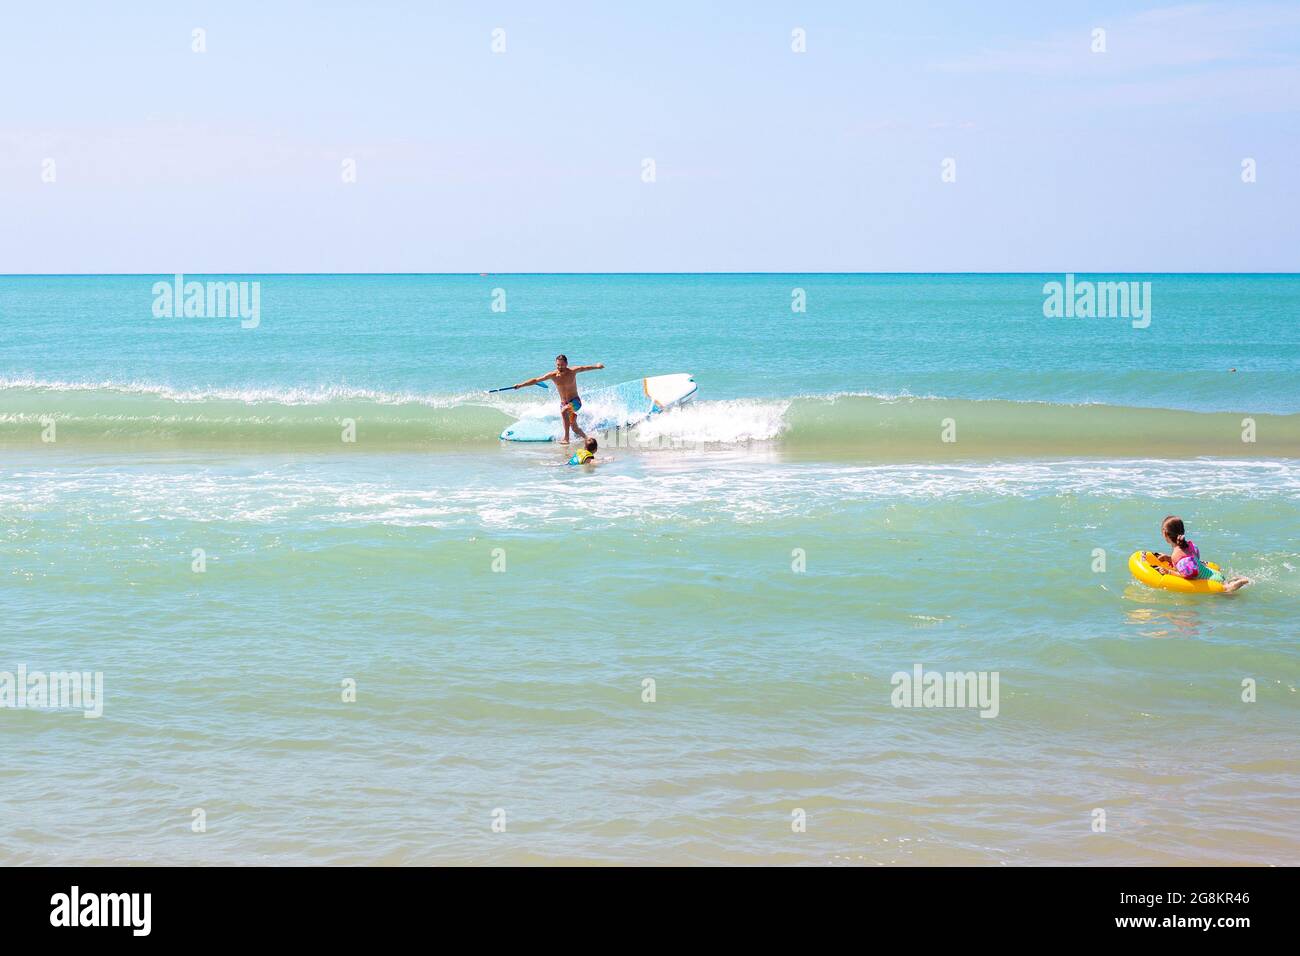 Anapa, Russia-07.07.2021: Tourist swims in the sea and surfs, falls off the board. Get on your surfboard and practice. Stock Photo